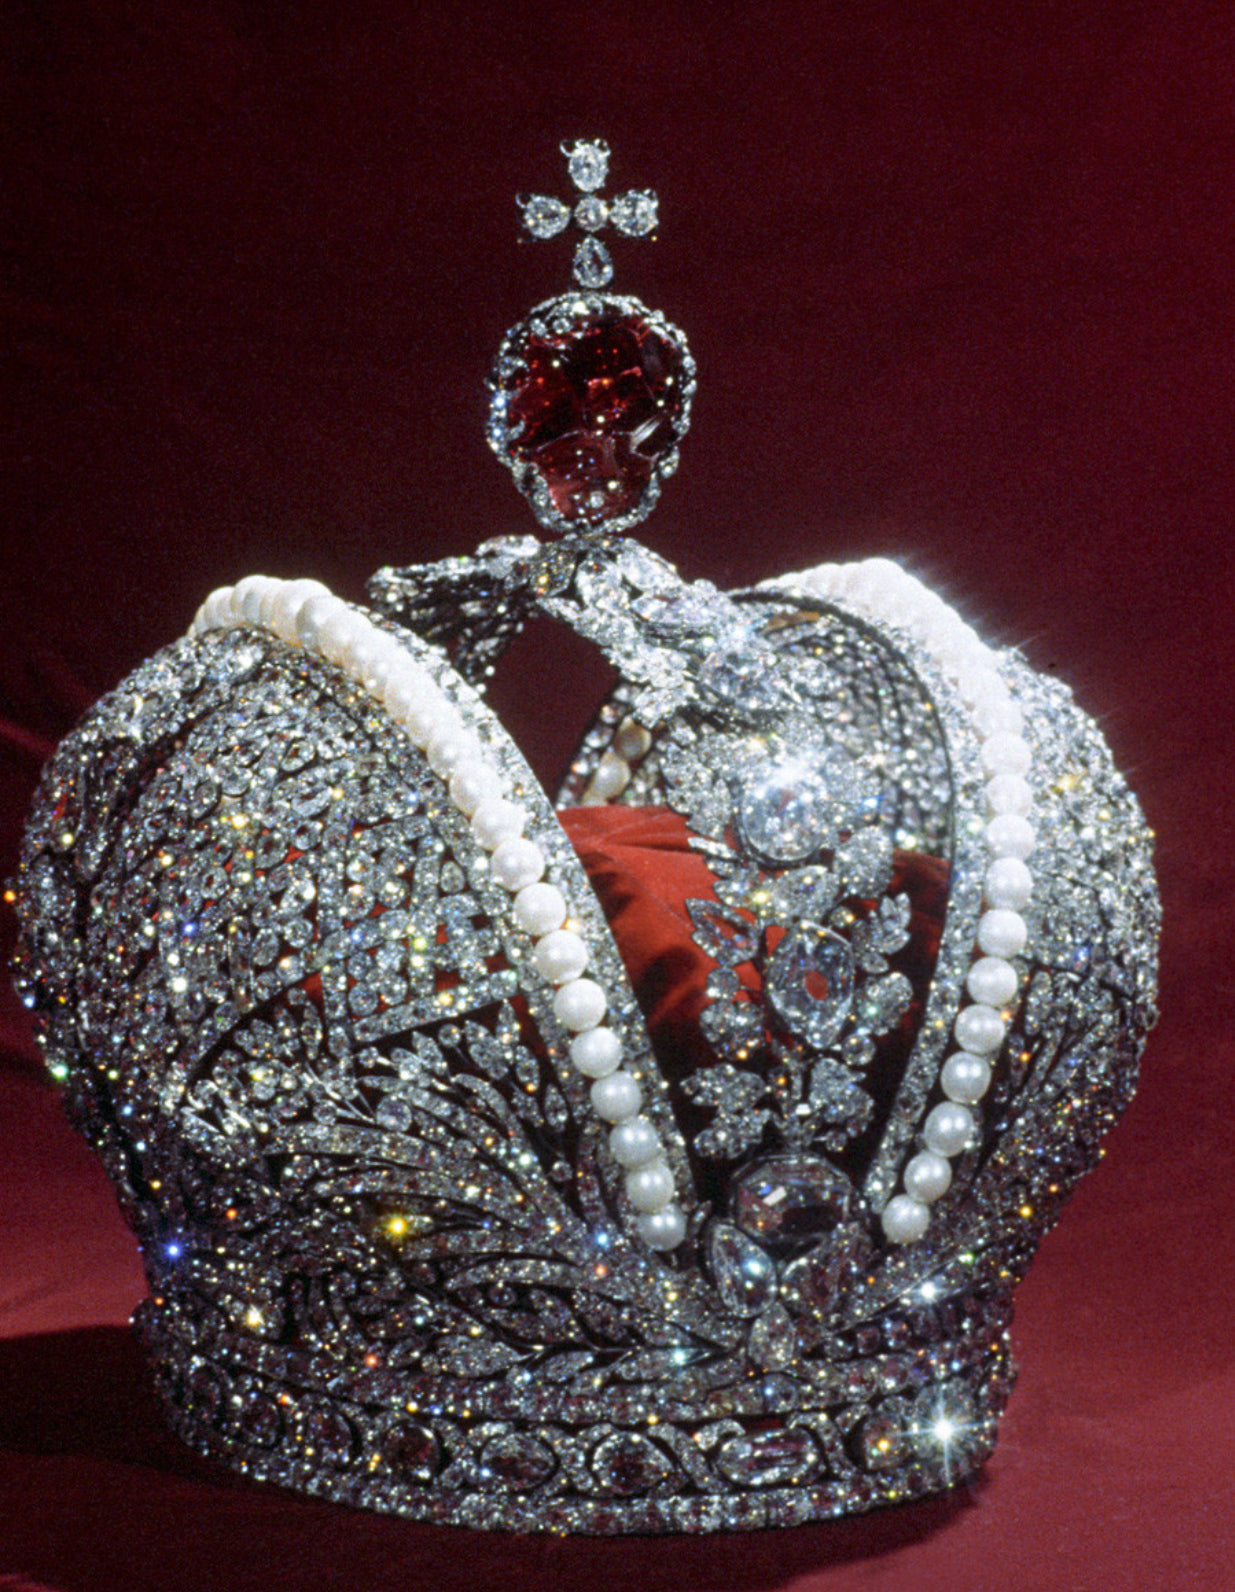 Regal Radiance: The Resplendent Jewels of Russia’s Romanov Dynasty